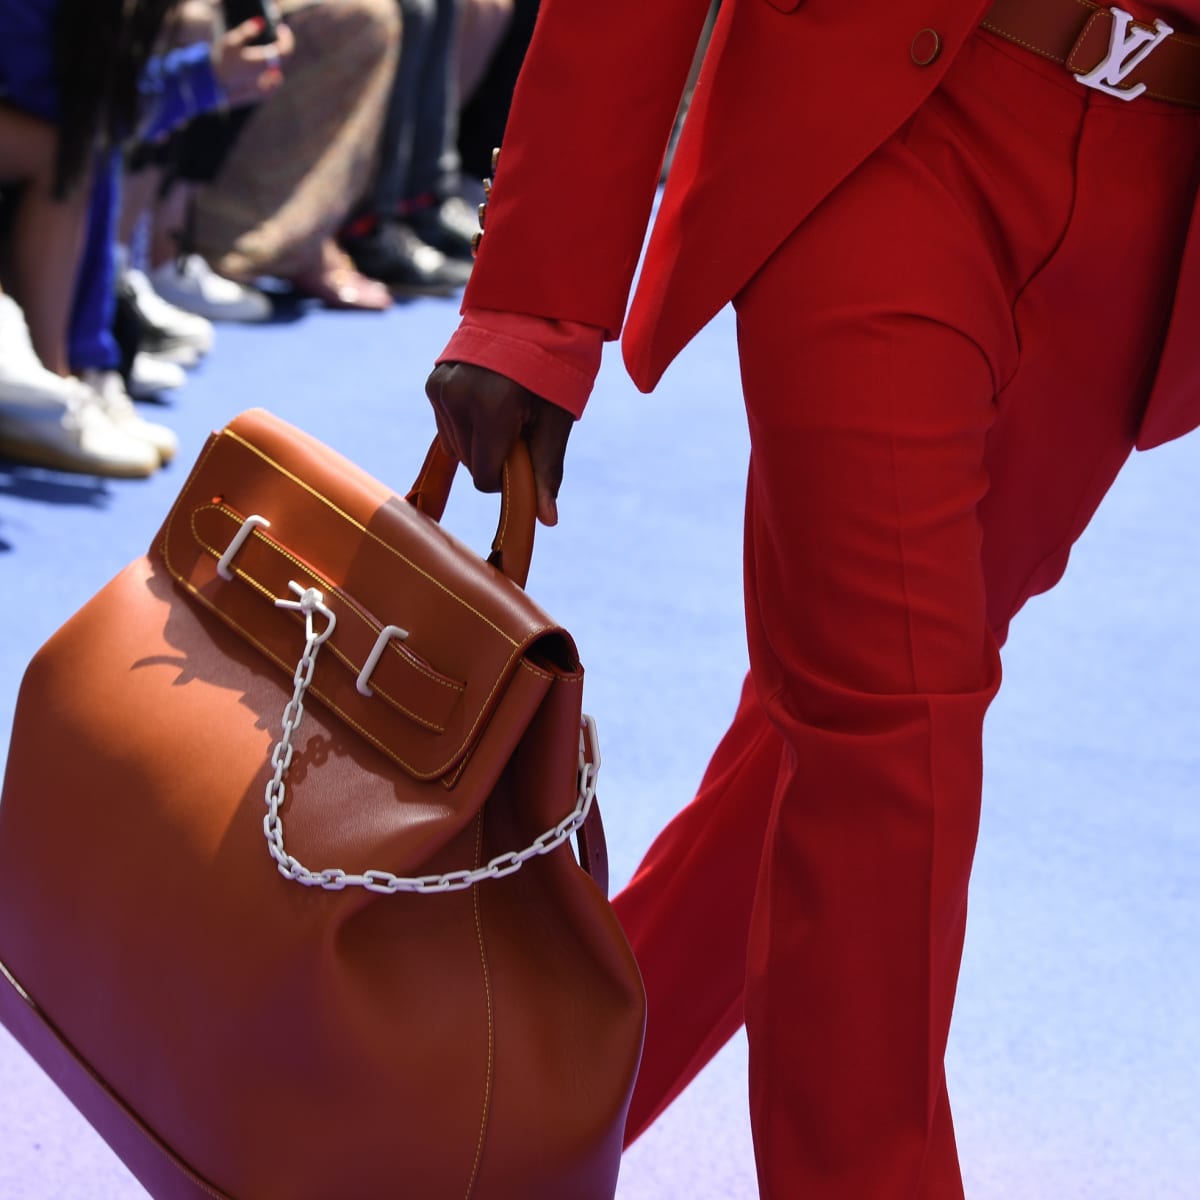 Louis Vuitton and Dior drive 16% revenue growth at LVMH